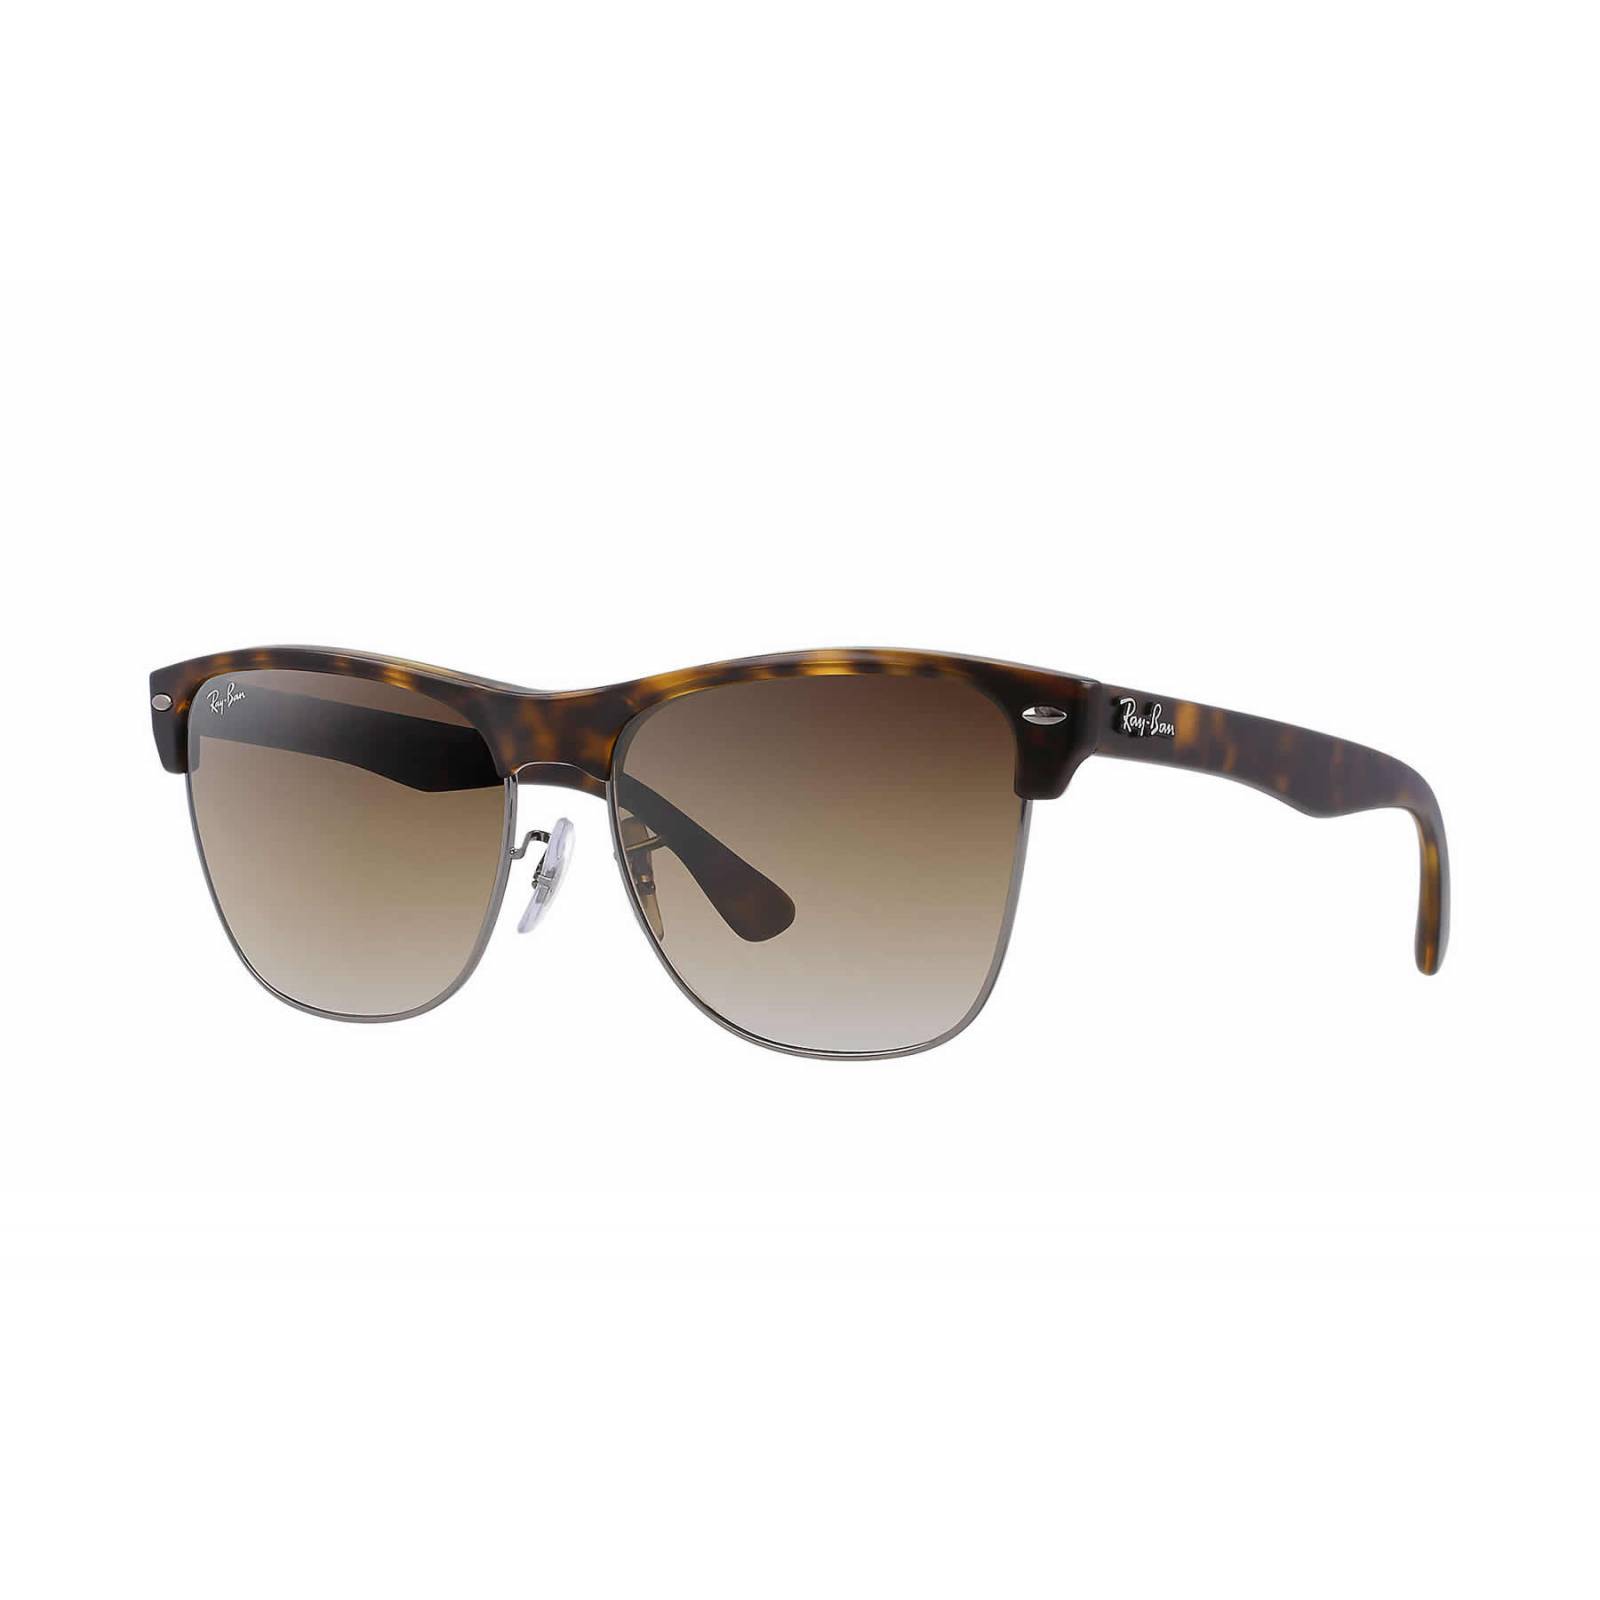 Lentes de sol Ray Ban Clubmaster Oversized RB4175 878/51 57MM Unisex